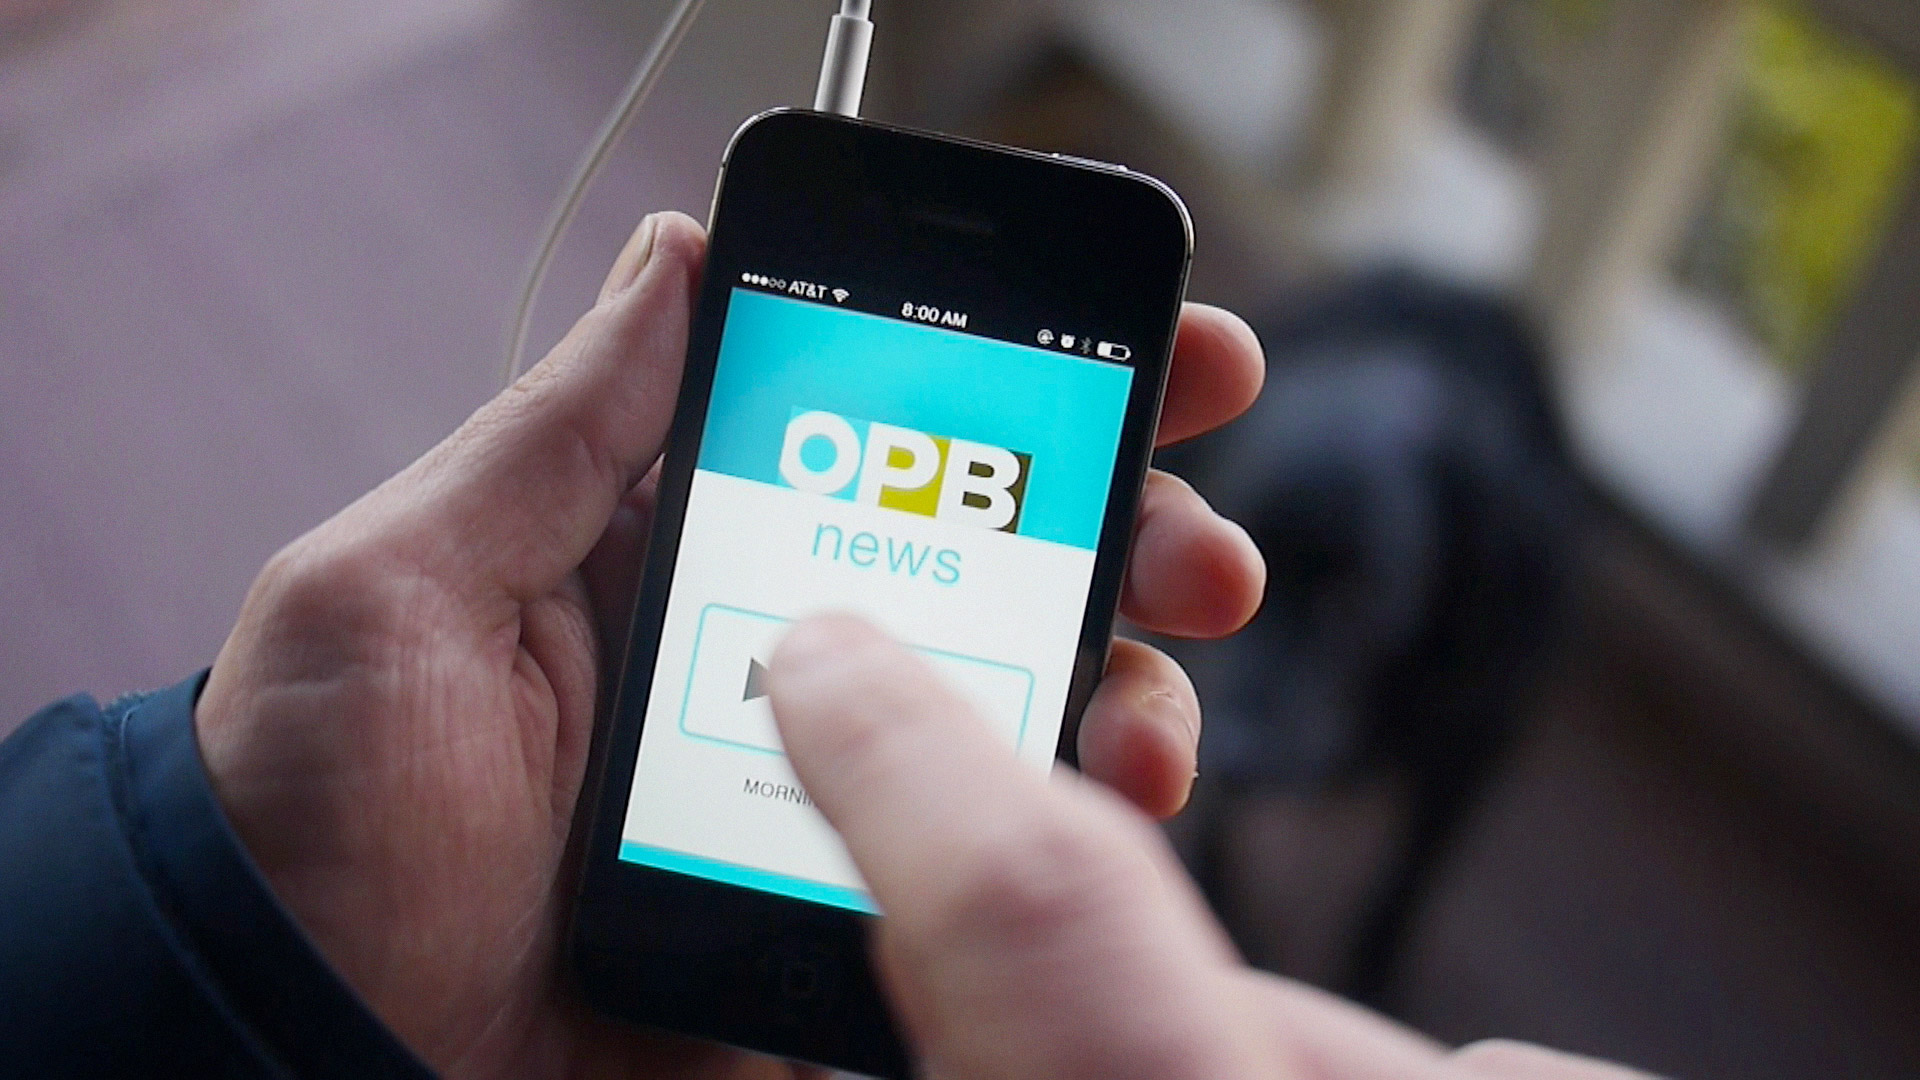 Person listening to OPB radio on mobile device